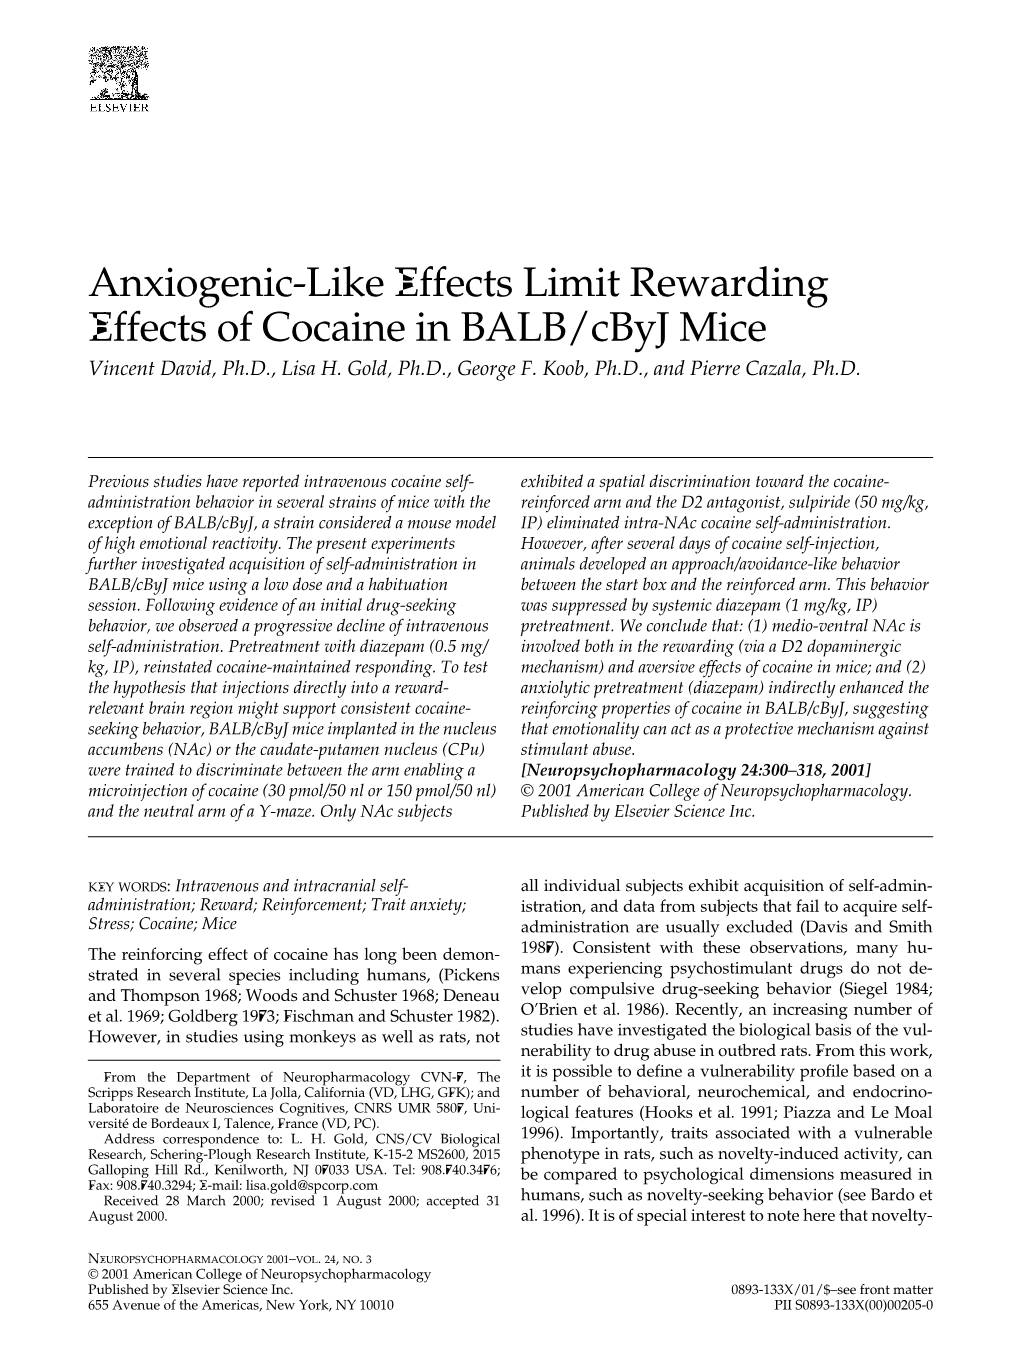 Anxiogenic-Like Effects Limit Rewarding Effects of Cocaine in BALB/Cbyj Mice Vincent David, Ph.D., Lisa H